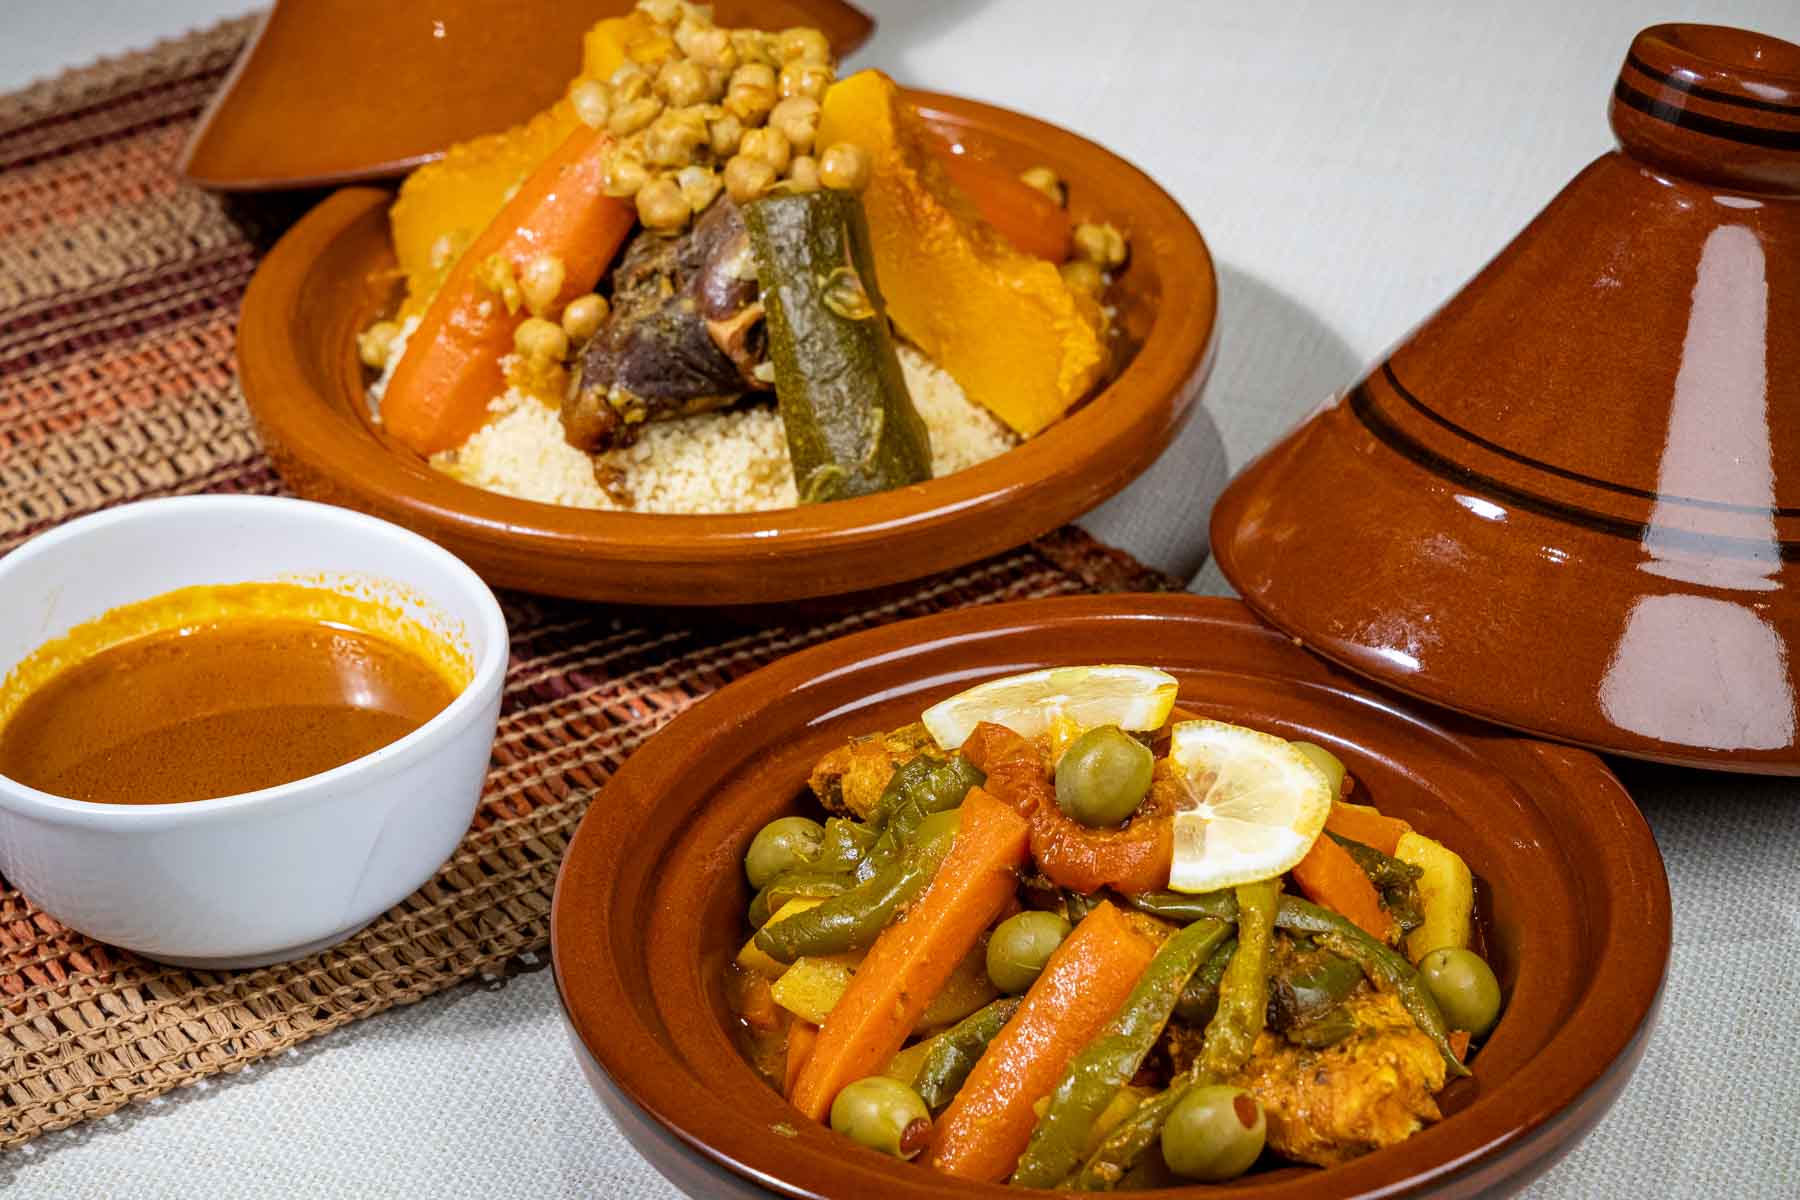 Vegetarian Tagine and Fish Tagine at Cous Cous Cafe